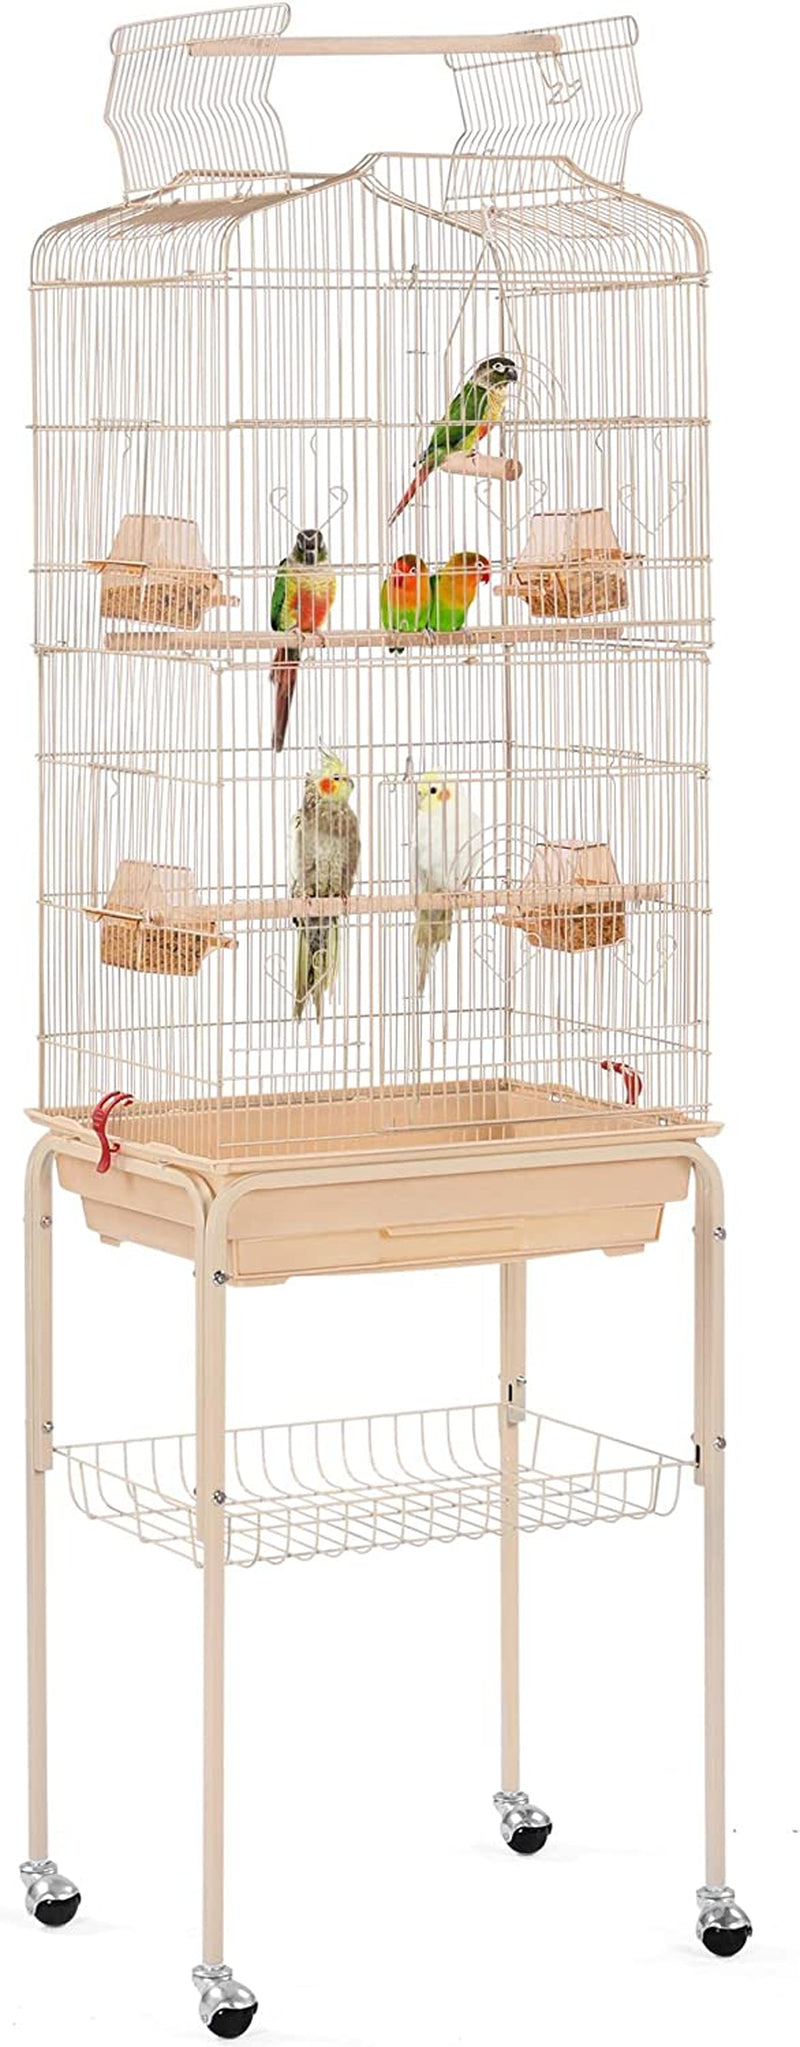 64’’ H Open Top Metal Medium Small Parrot Parakeet Bird Cage W/Double Doors, Slide-Out Tray & Detachable Rolling Stand